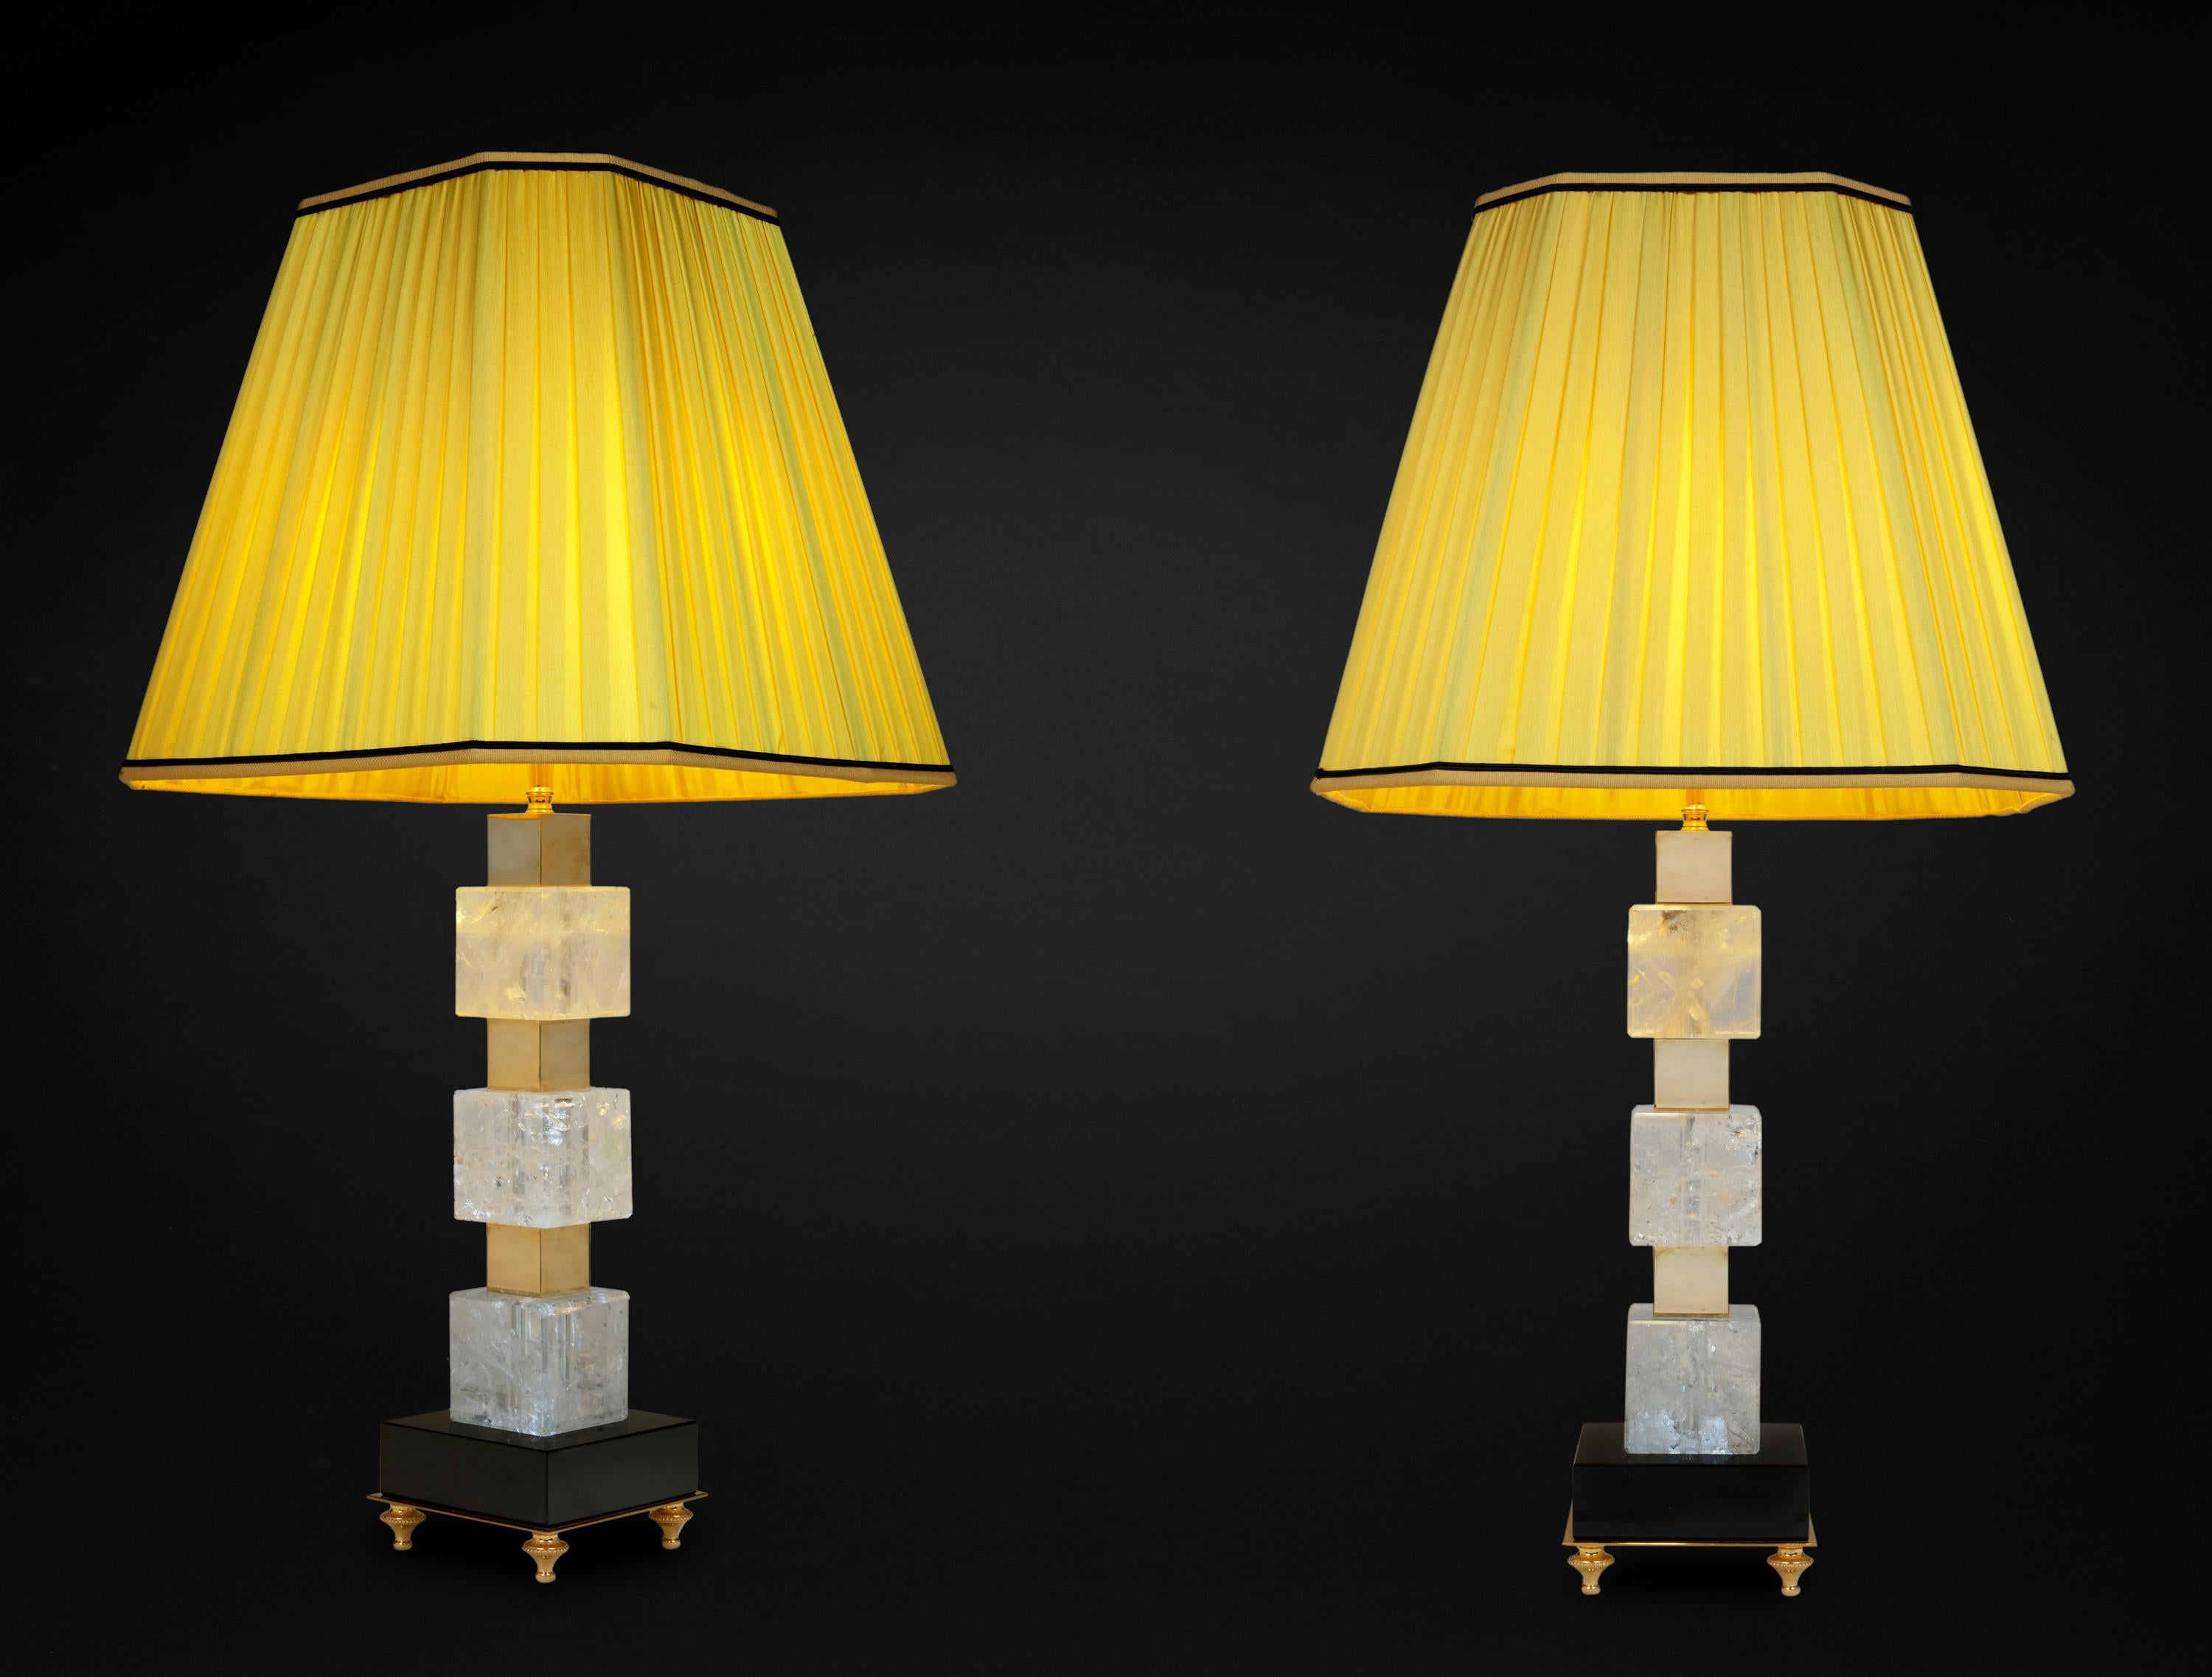 Unique pair of rock crystal and belgium black marble table lamps.
24 K gold plated brass.
Made in FRANCE.
Alexandre VOSSION DESIGN.